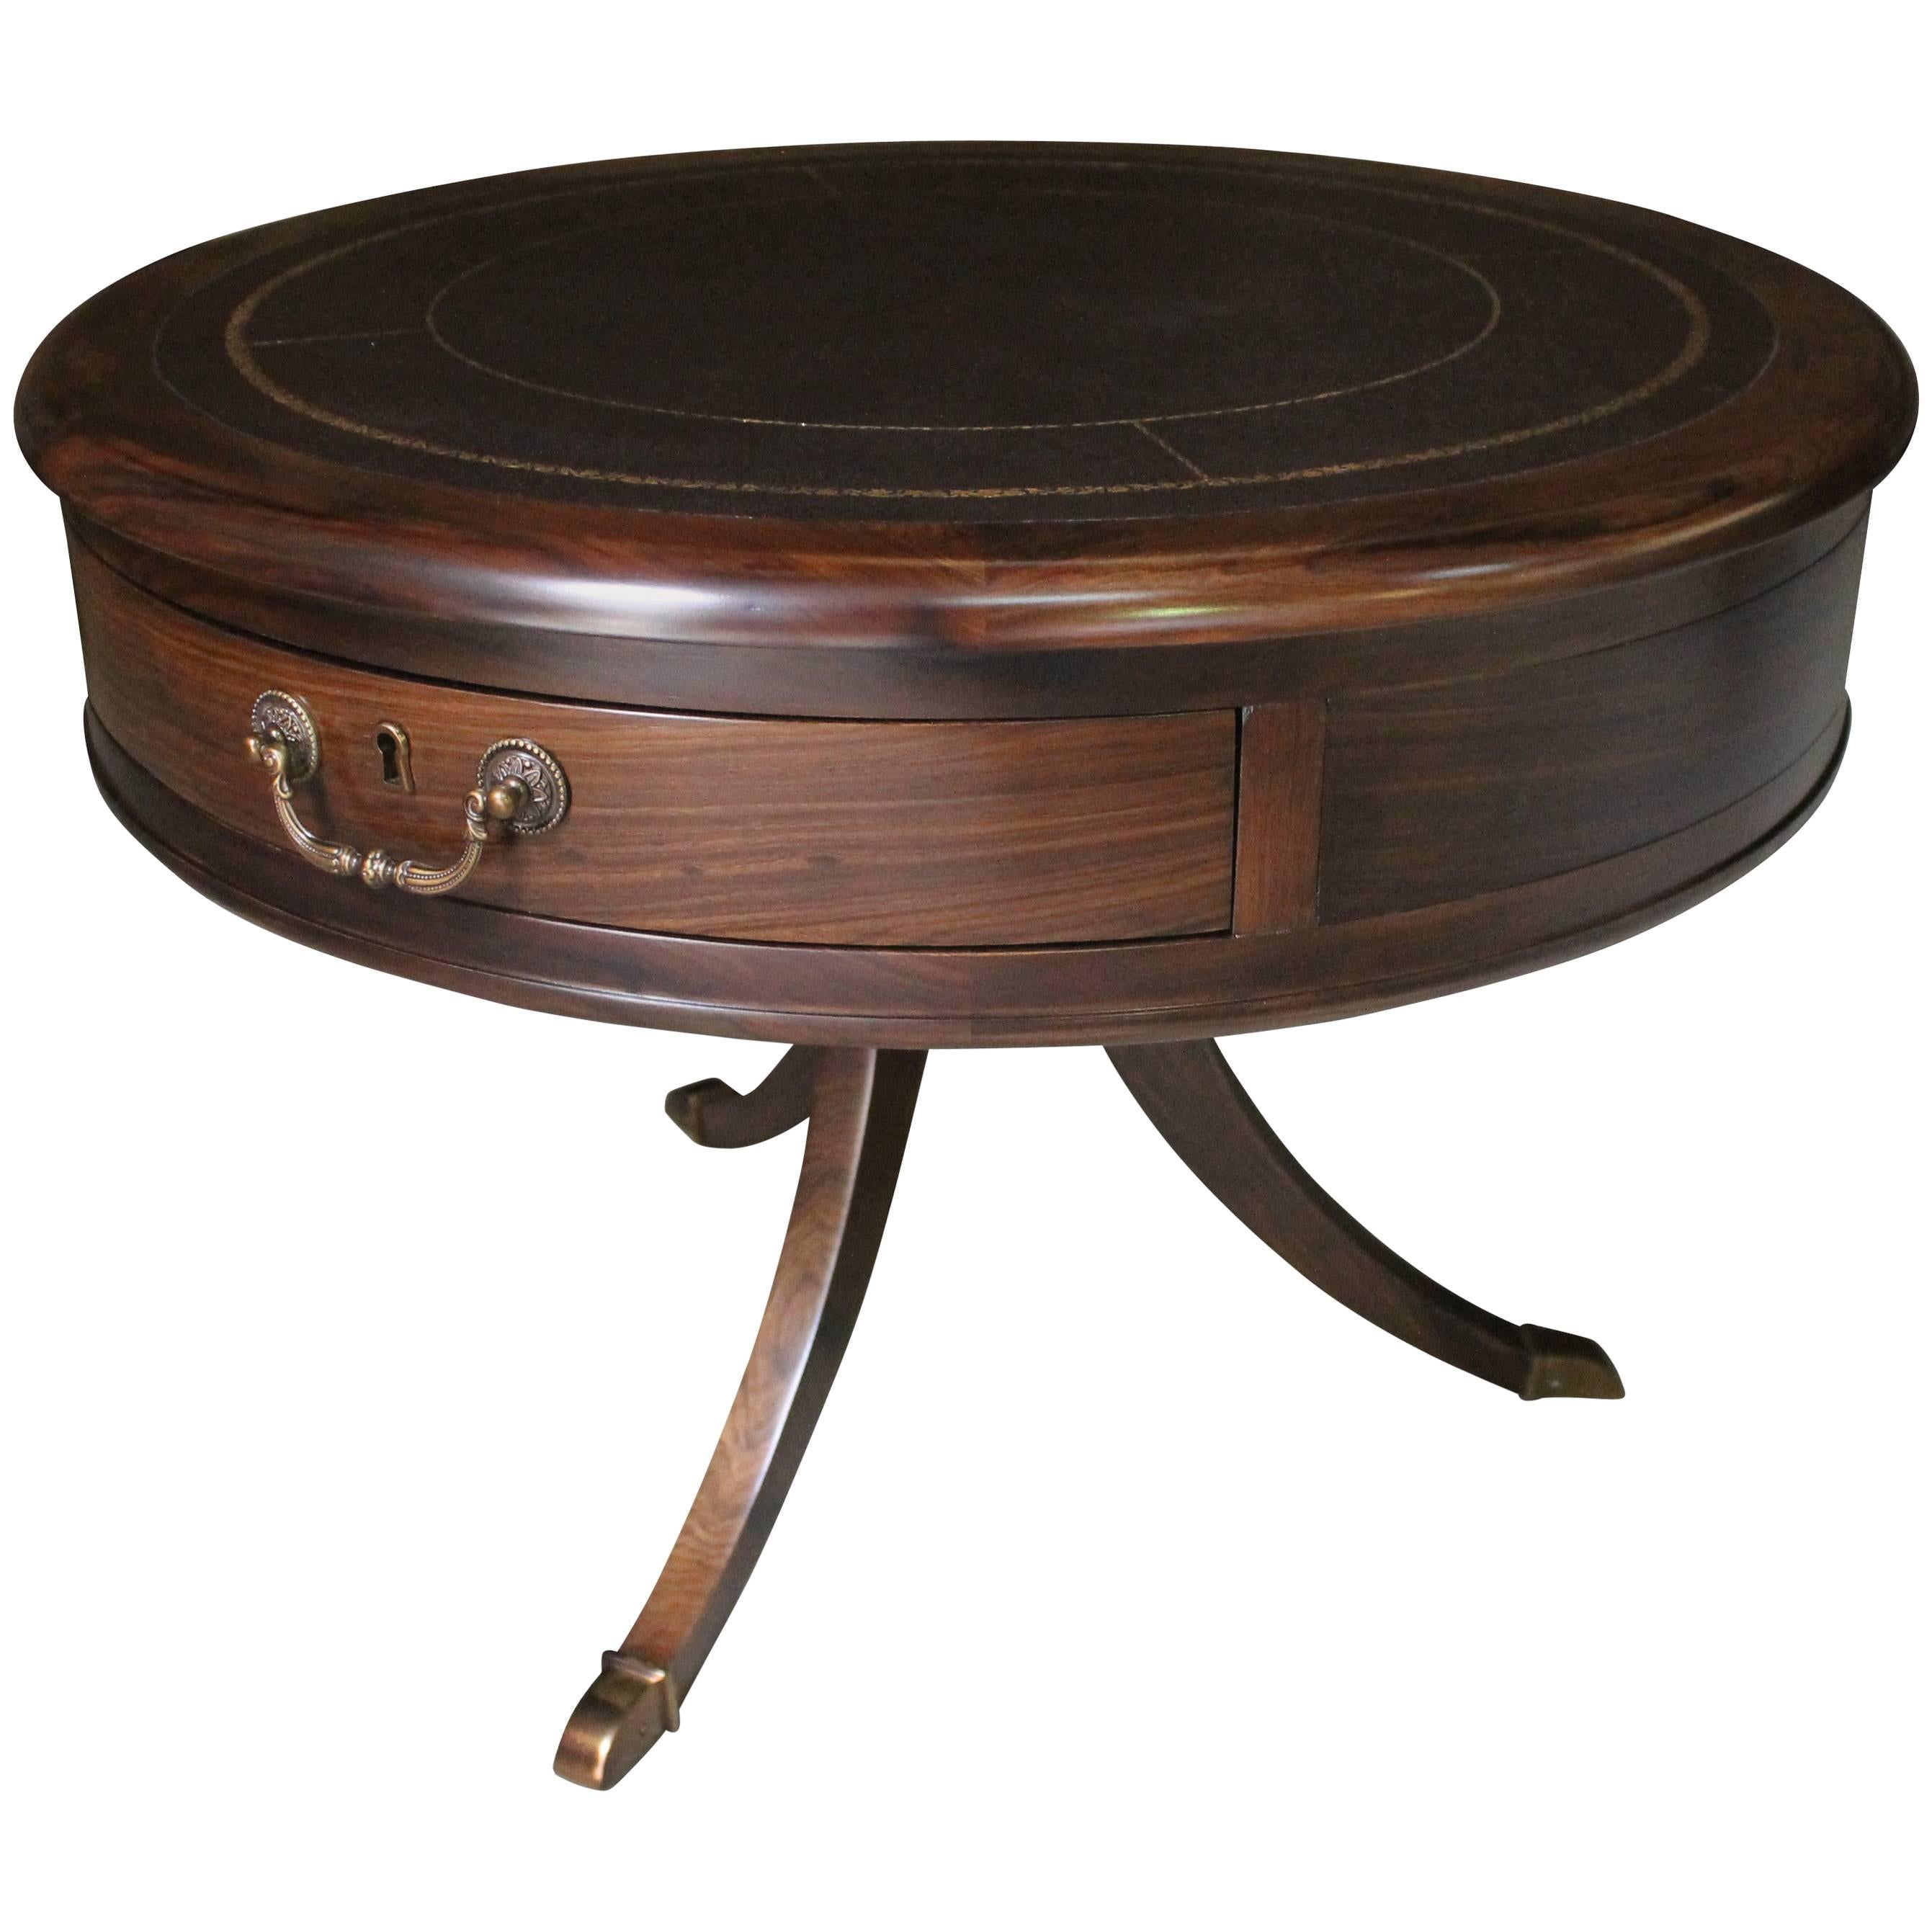 Oriana Table Gold Embossed Leather and Rosewood Table, Customizable 